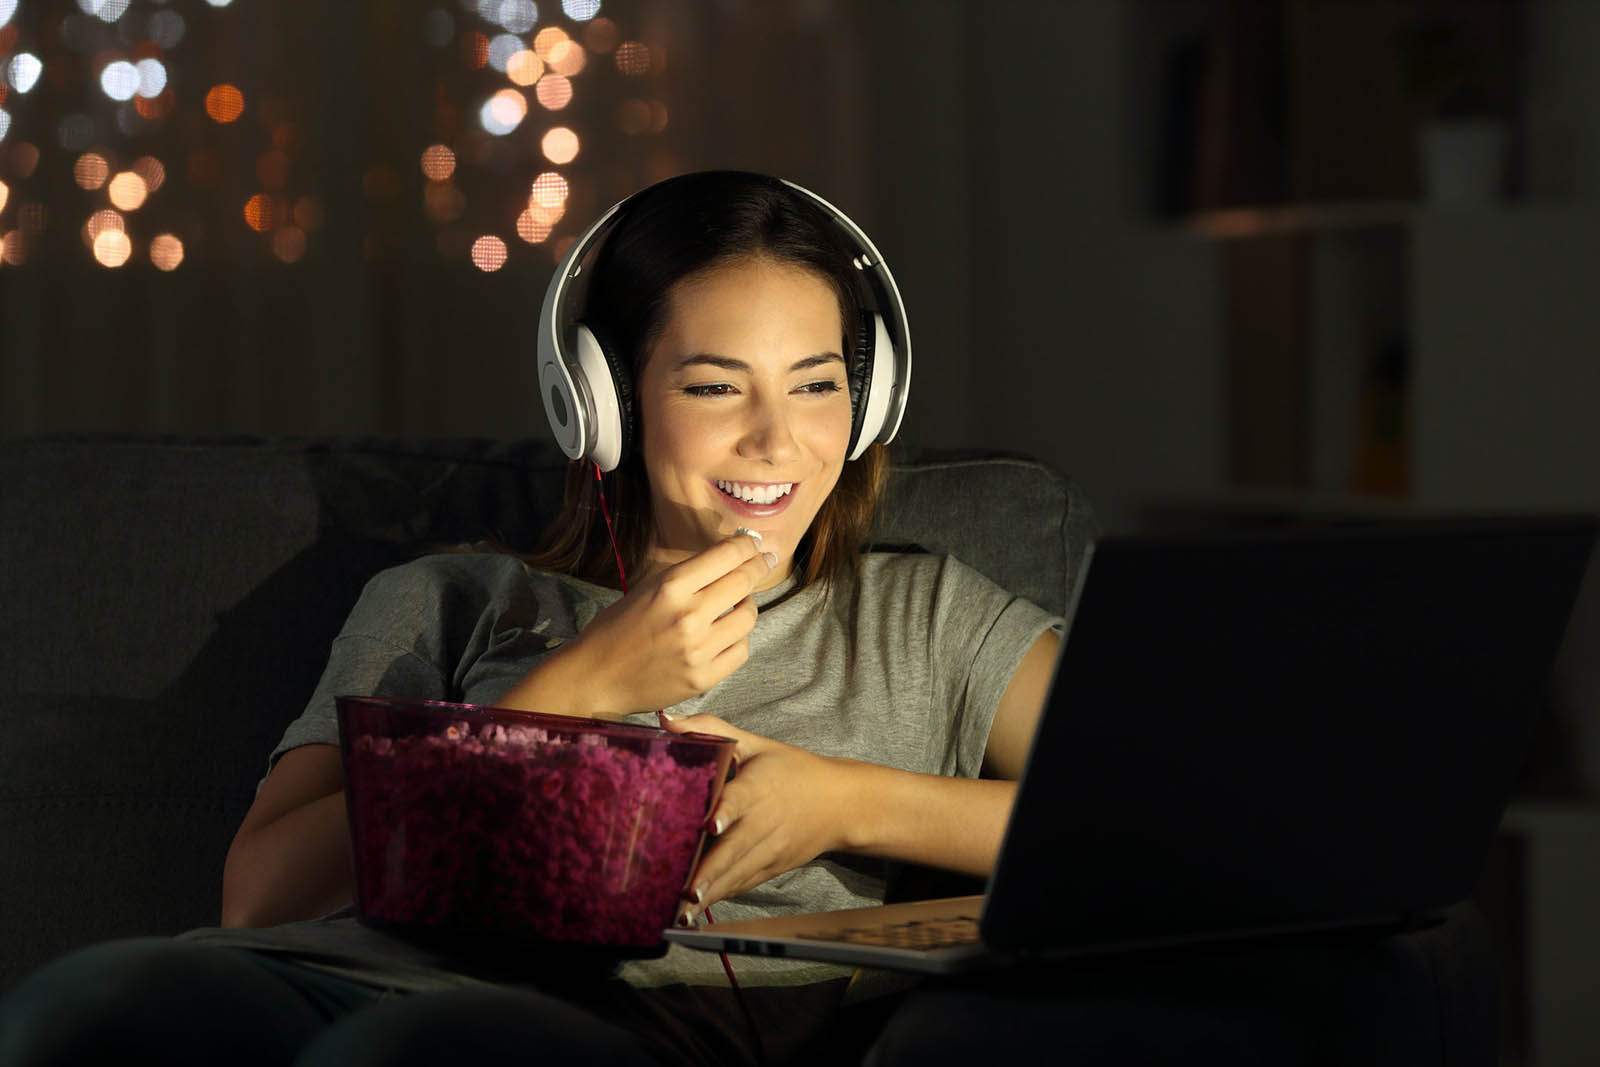 Which Night Animal Are You? Watching Streaming Netflix Show With Popcorn